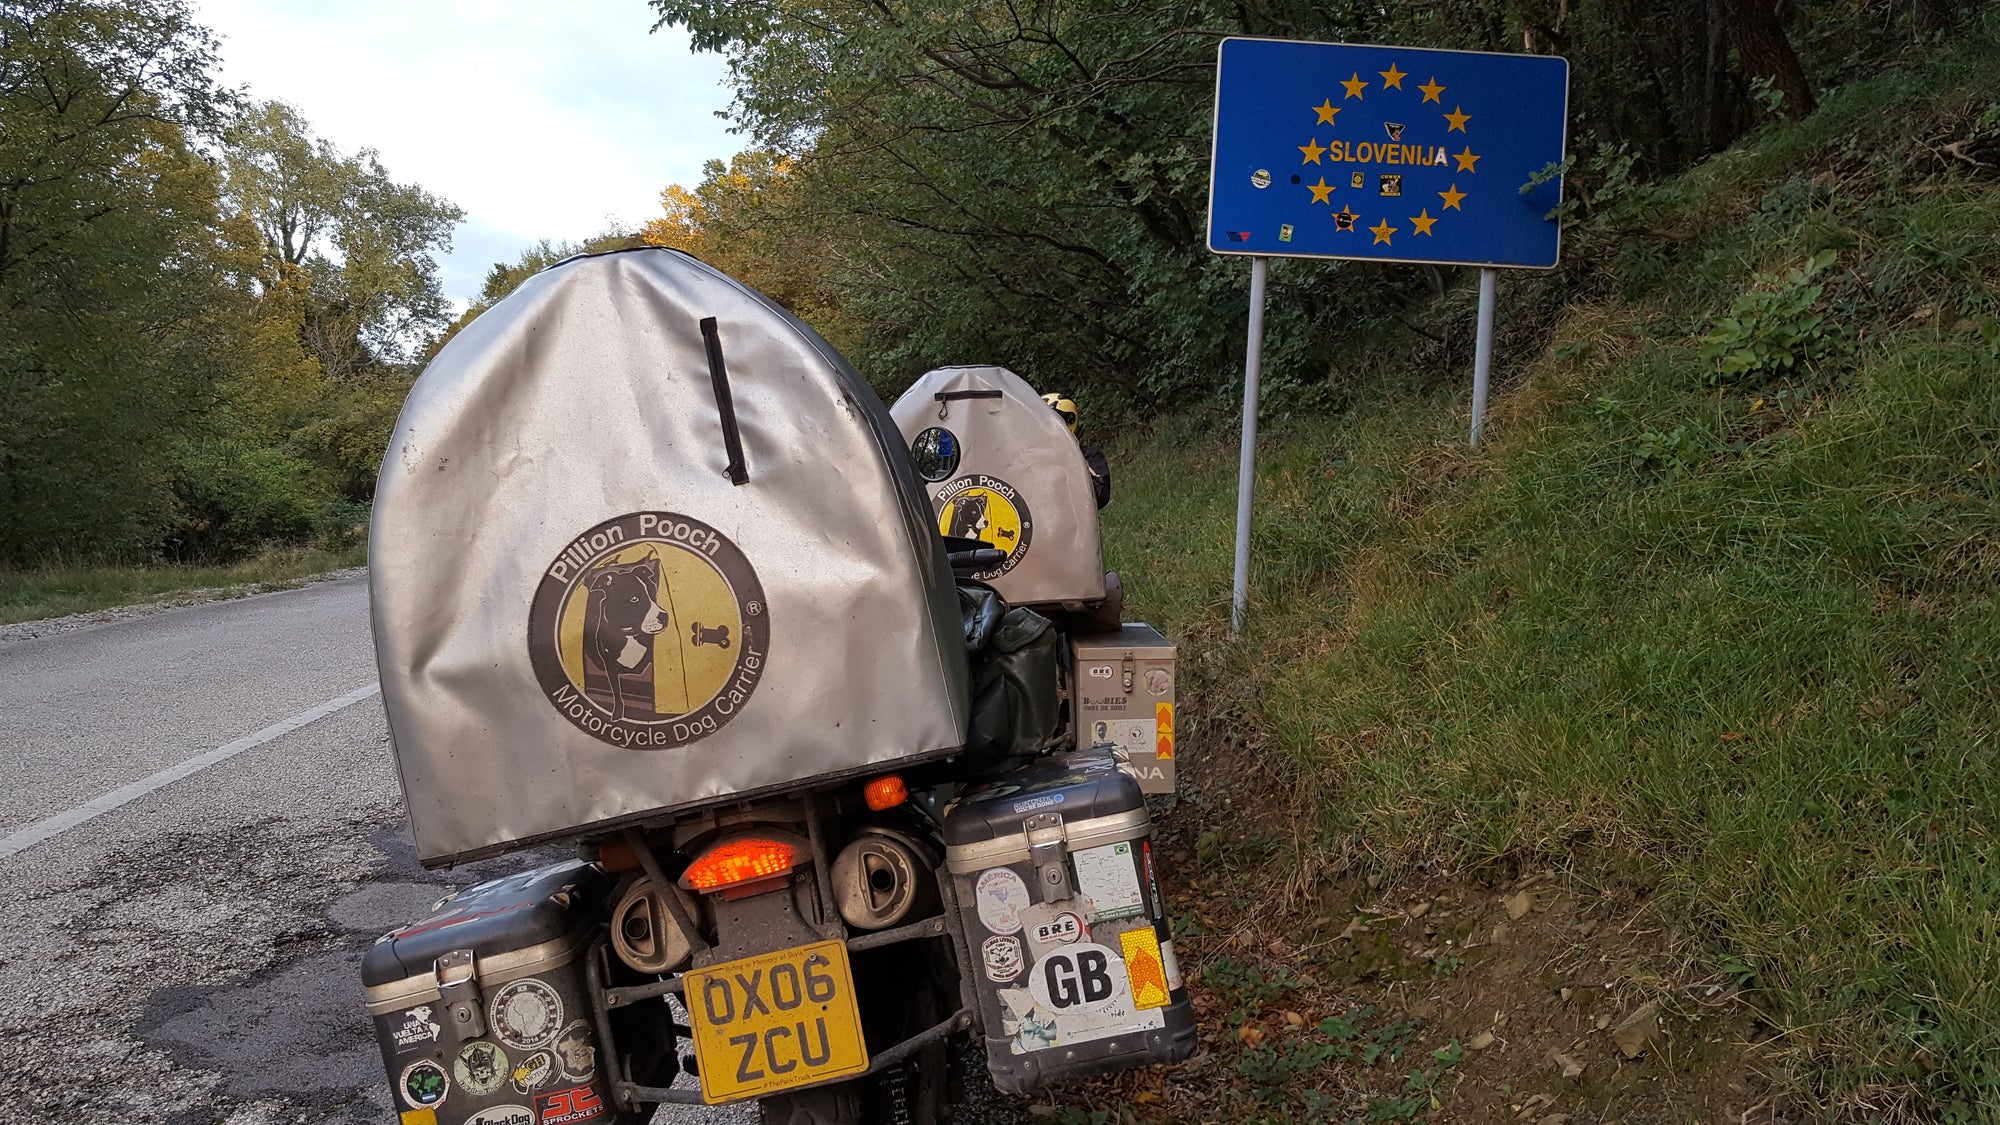 The Pack Track crossing in to Slovenia. Couldn't resist a photo of the Pillion Pooch's with the Slovenia sign.